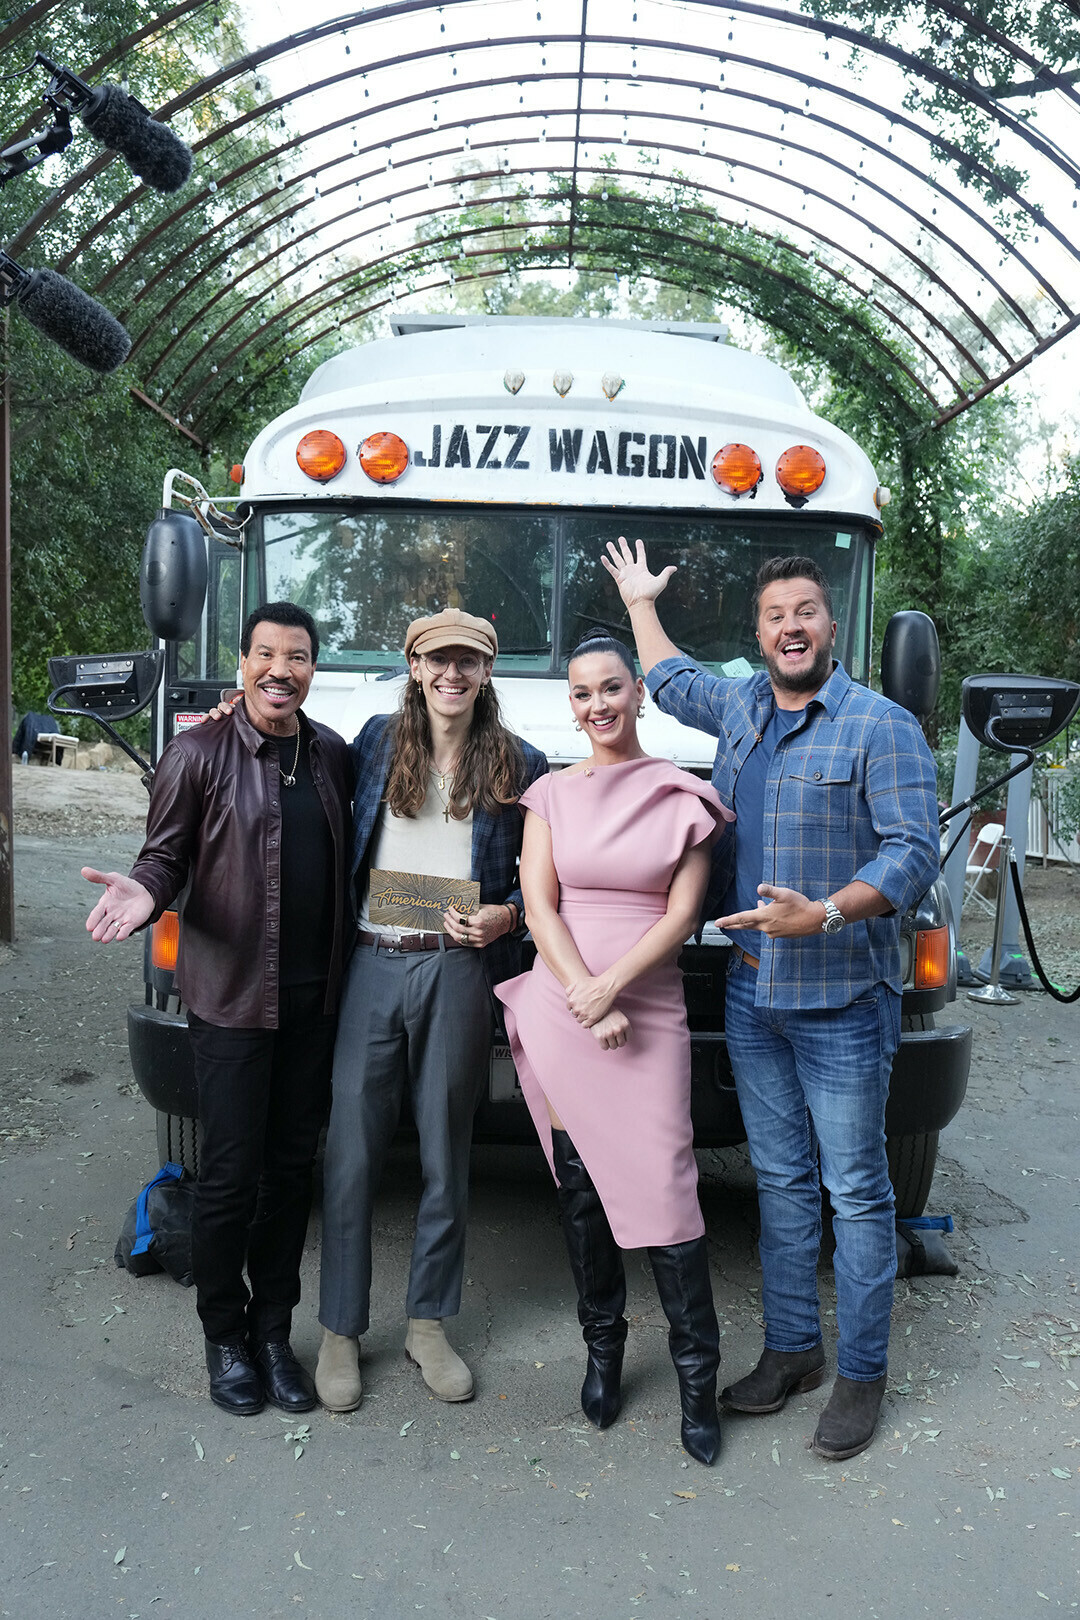 Chippewa Falls native CJ Rislove, second from left, poses with American Idol judges xxxxx in front of his bus.